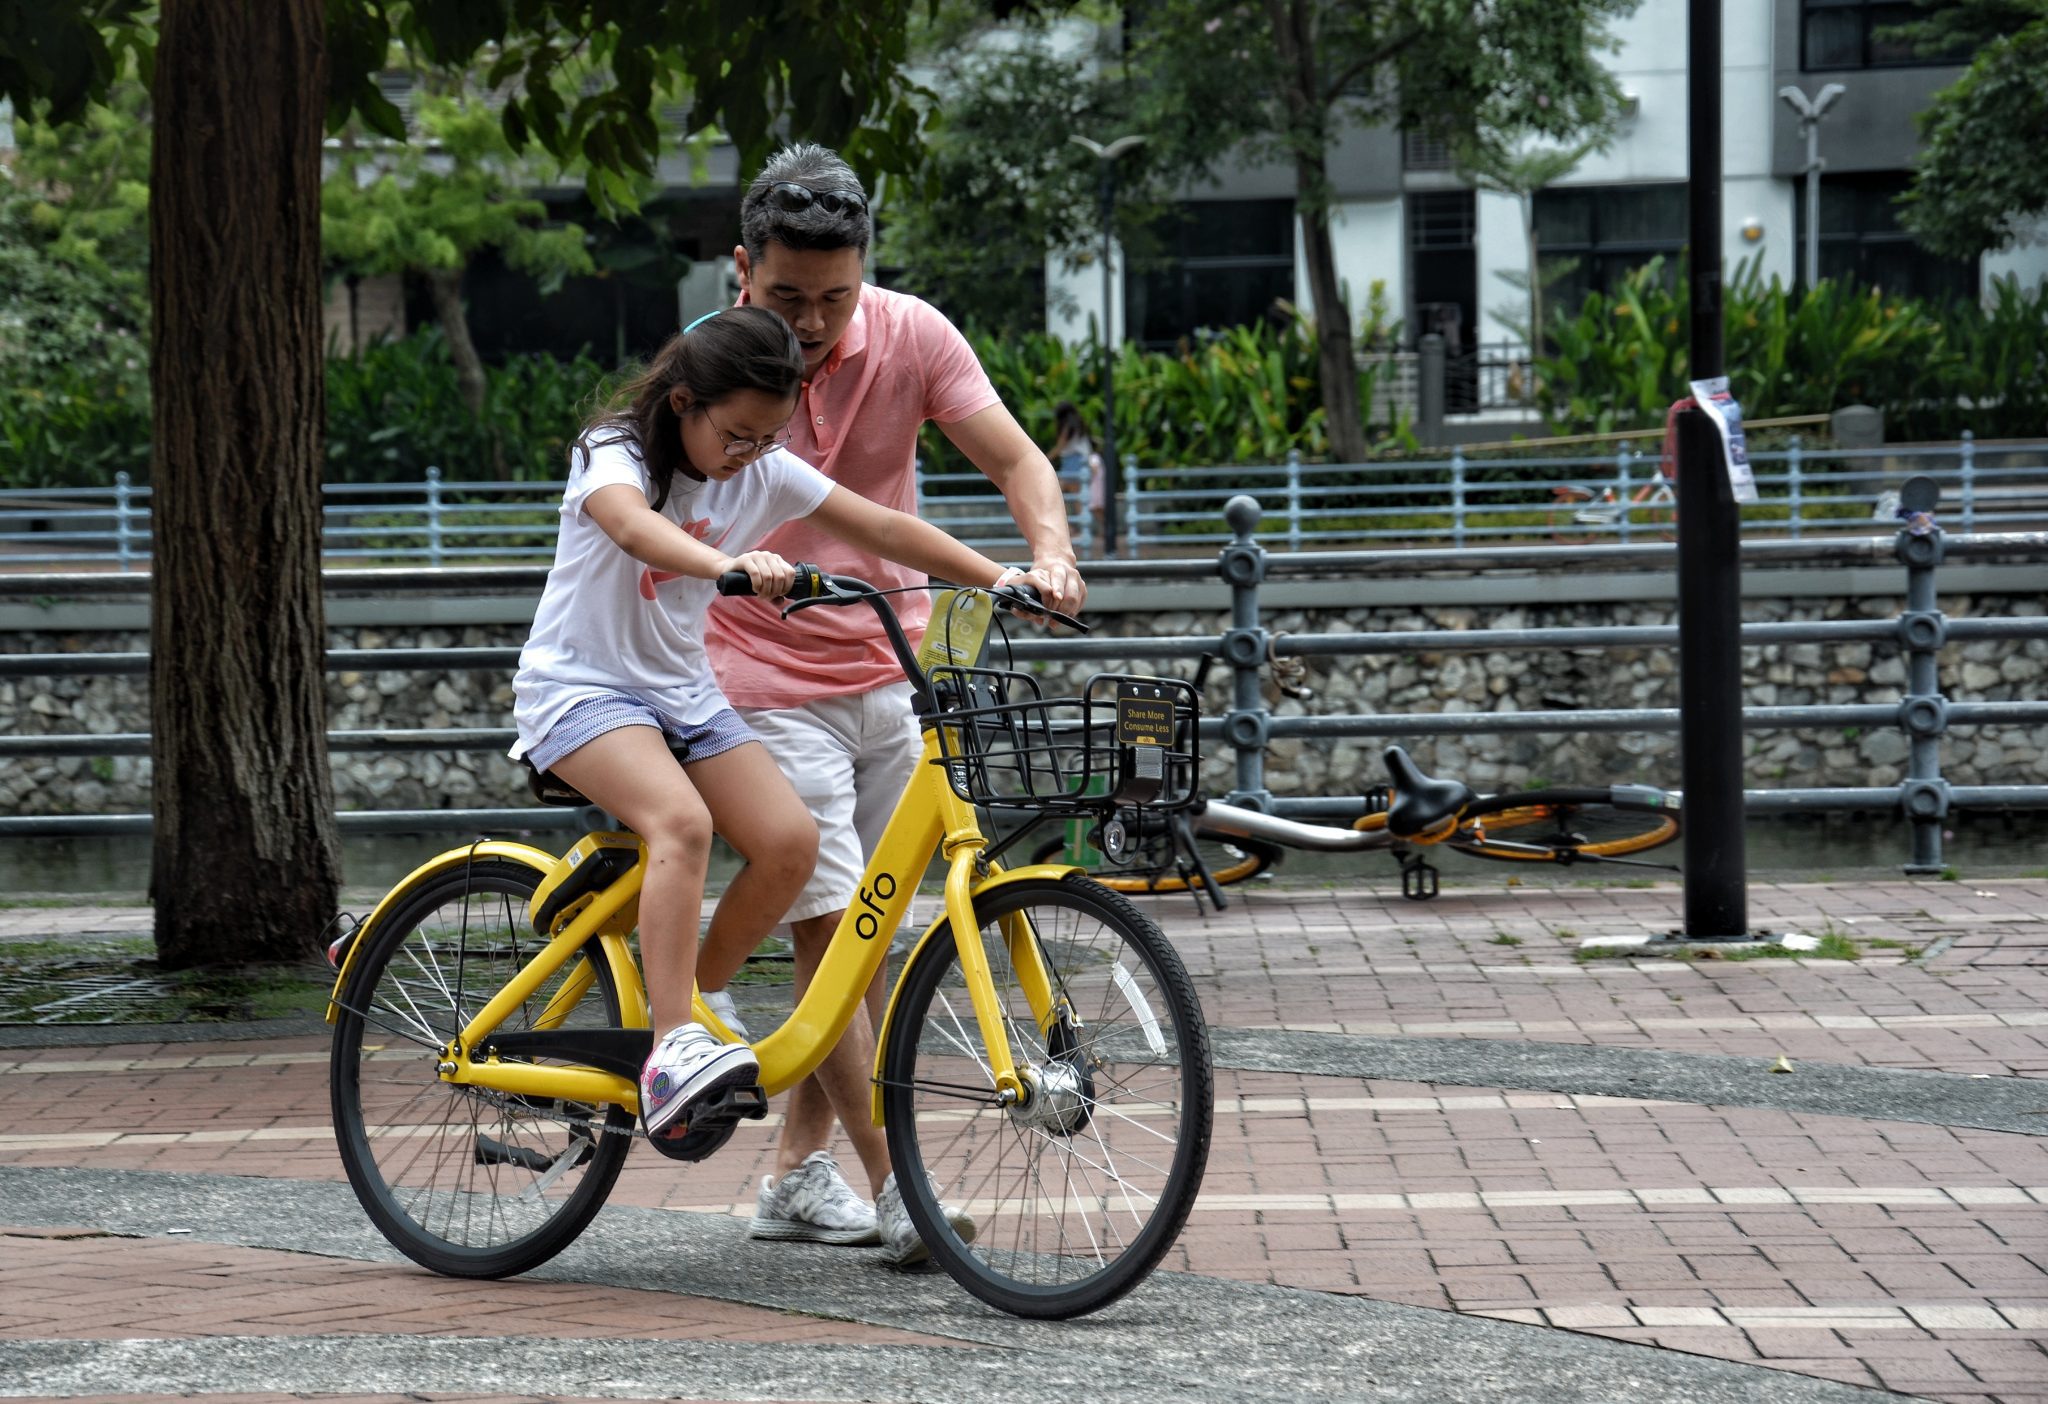 Girl riding bike beside dad as he helps guide her